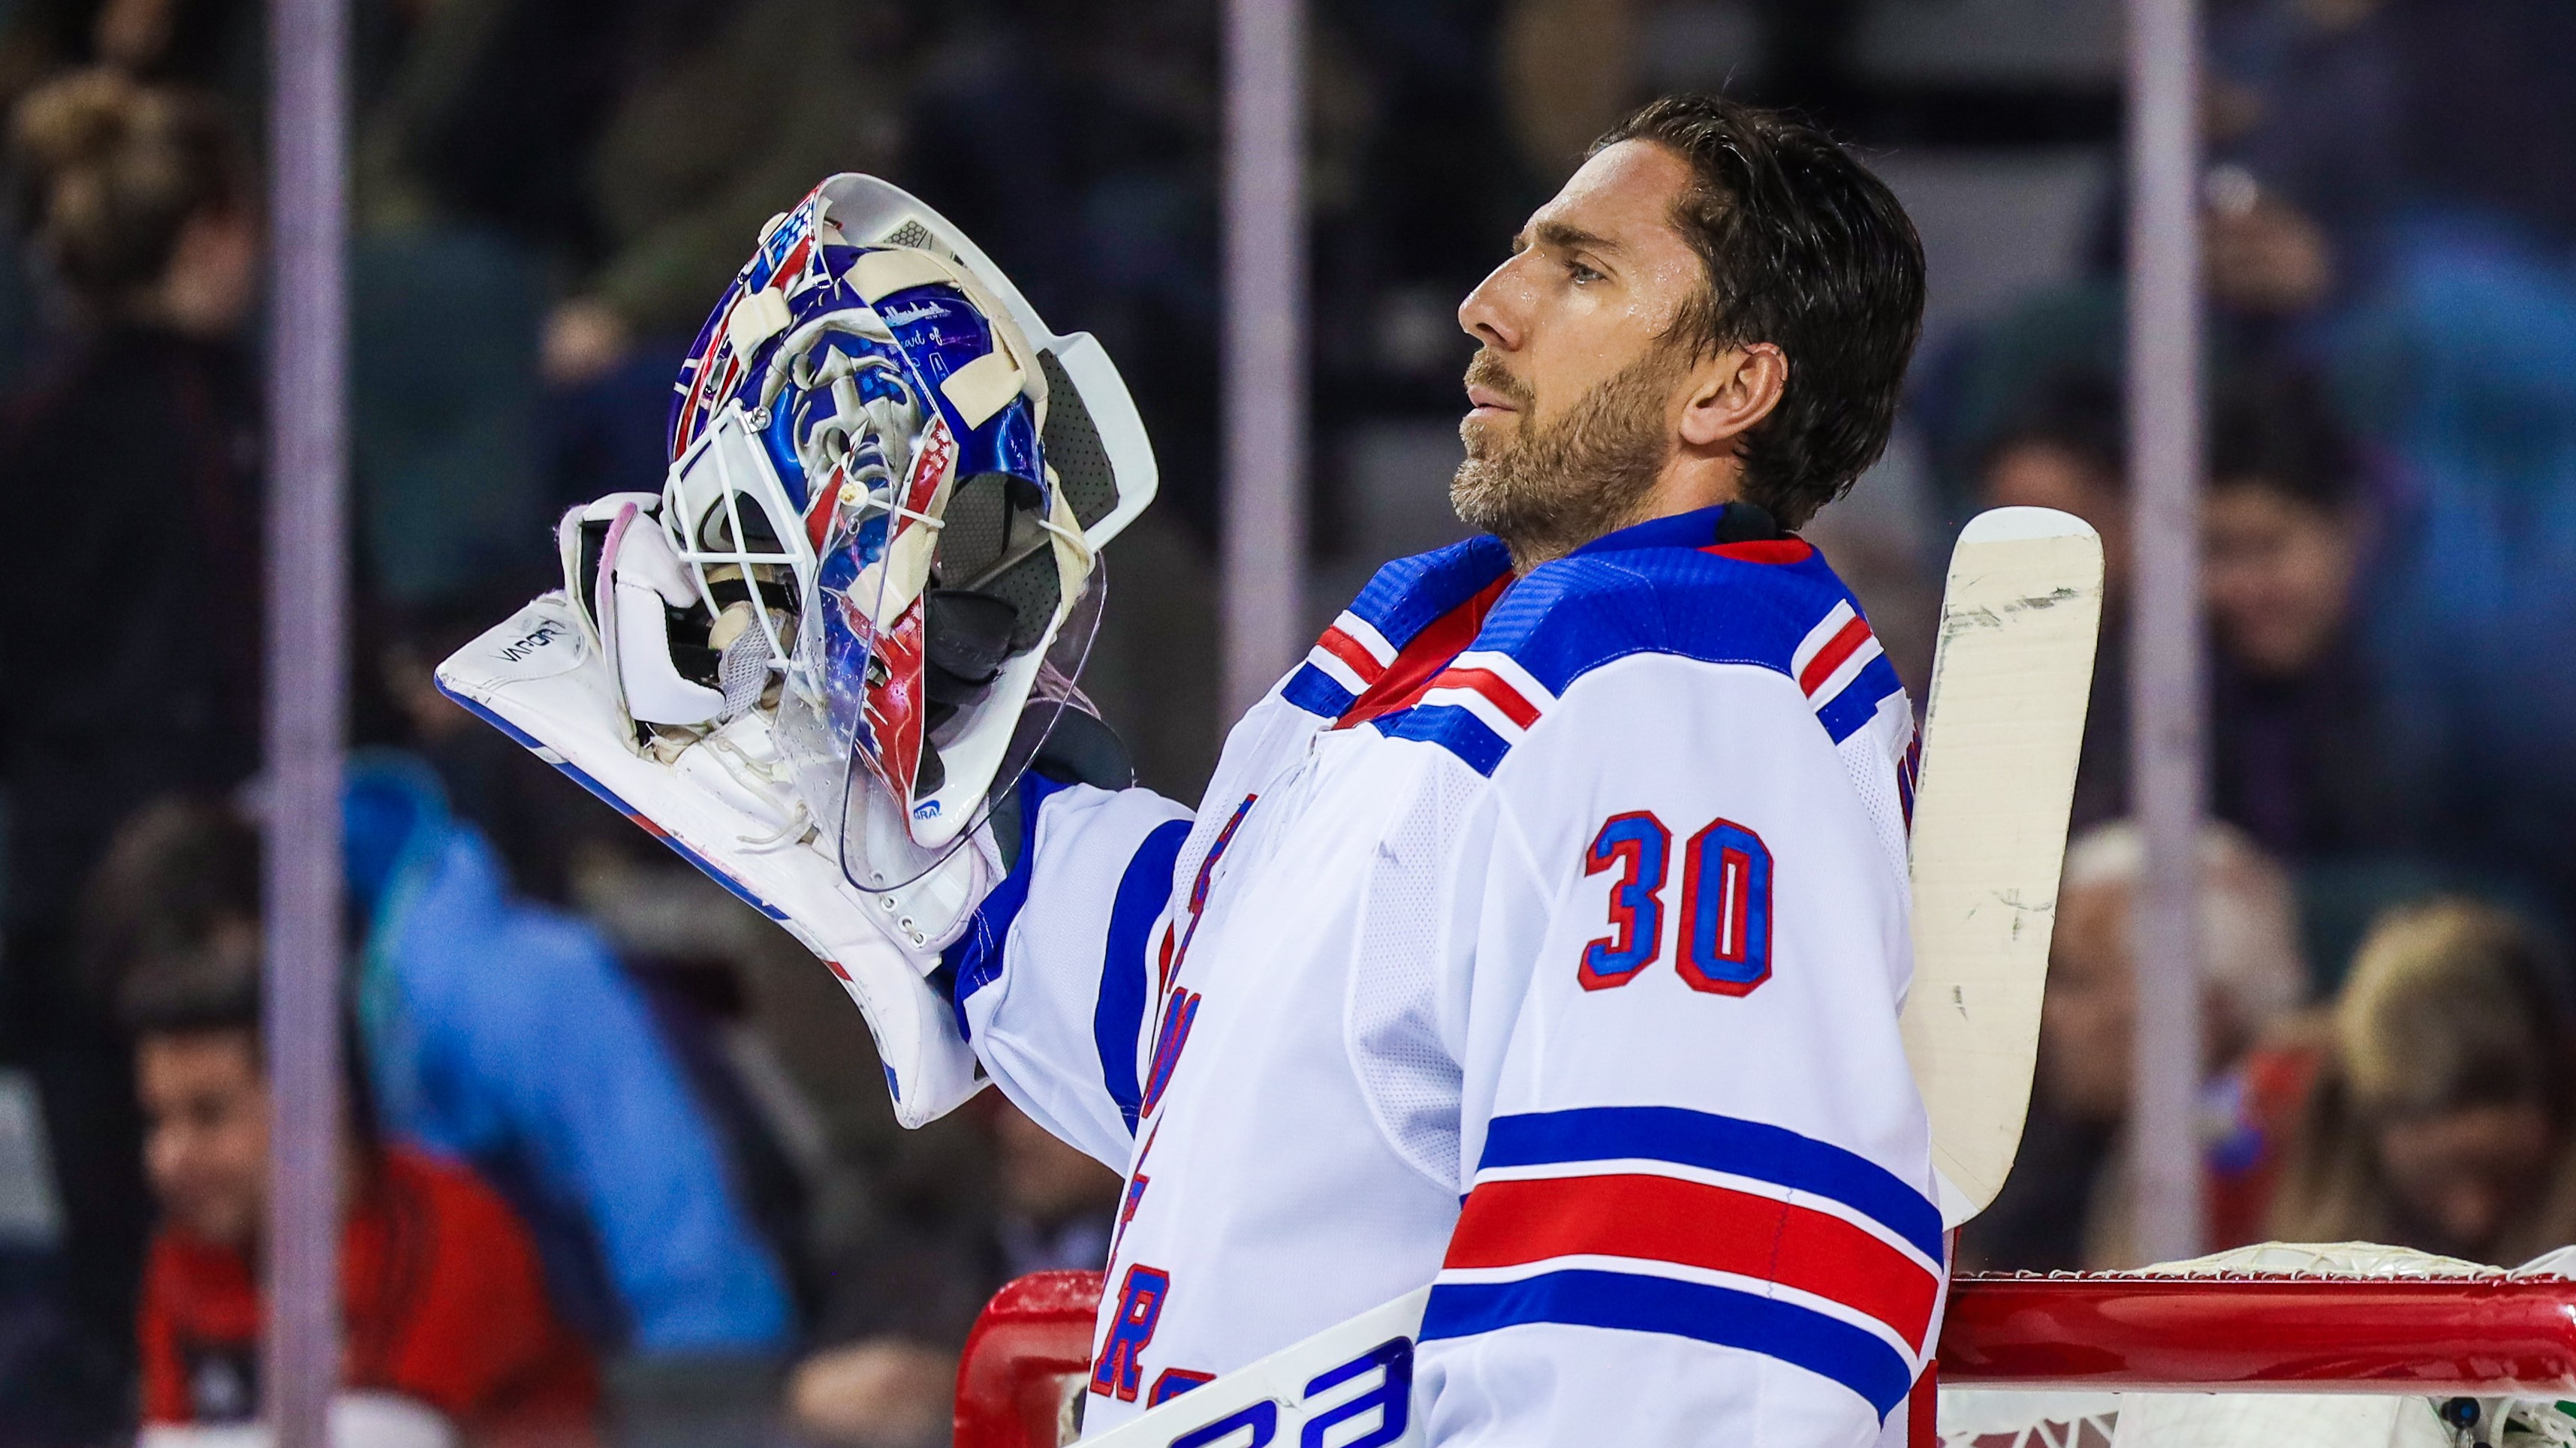 SEE IT: Henrik Lundqvist Welcomed Home From Hospital by Family